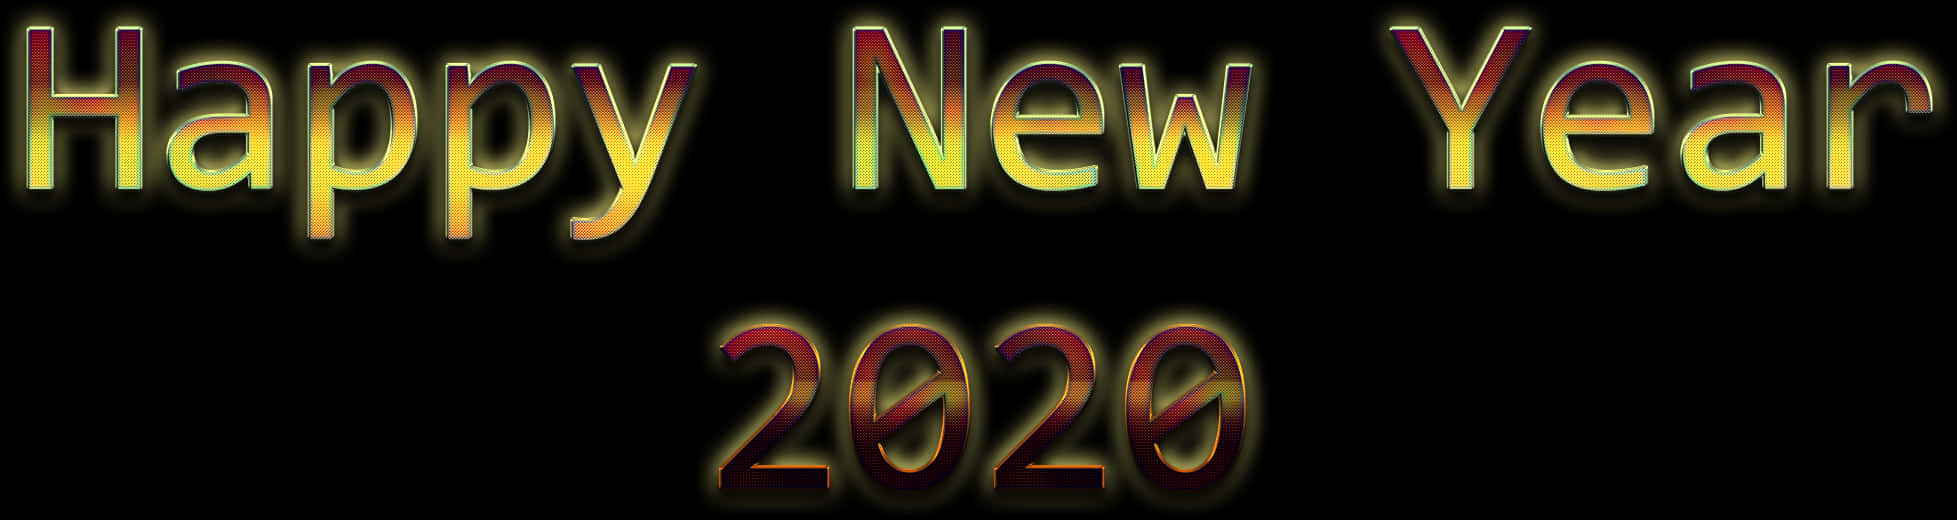 Happy New Year2020 Celebration Text PNG